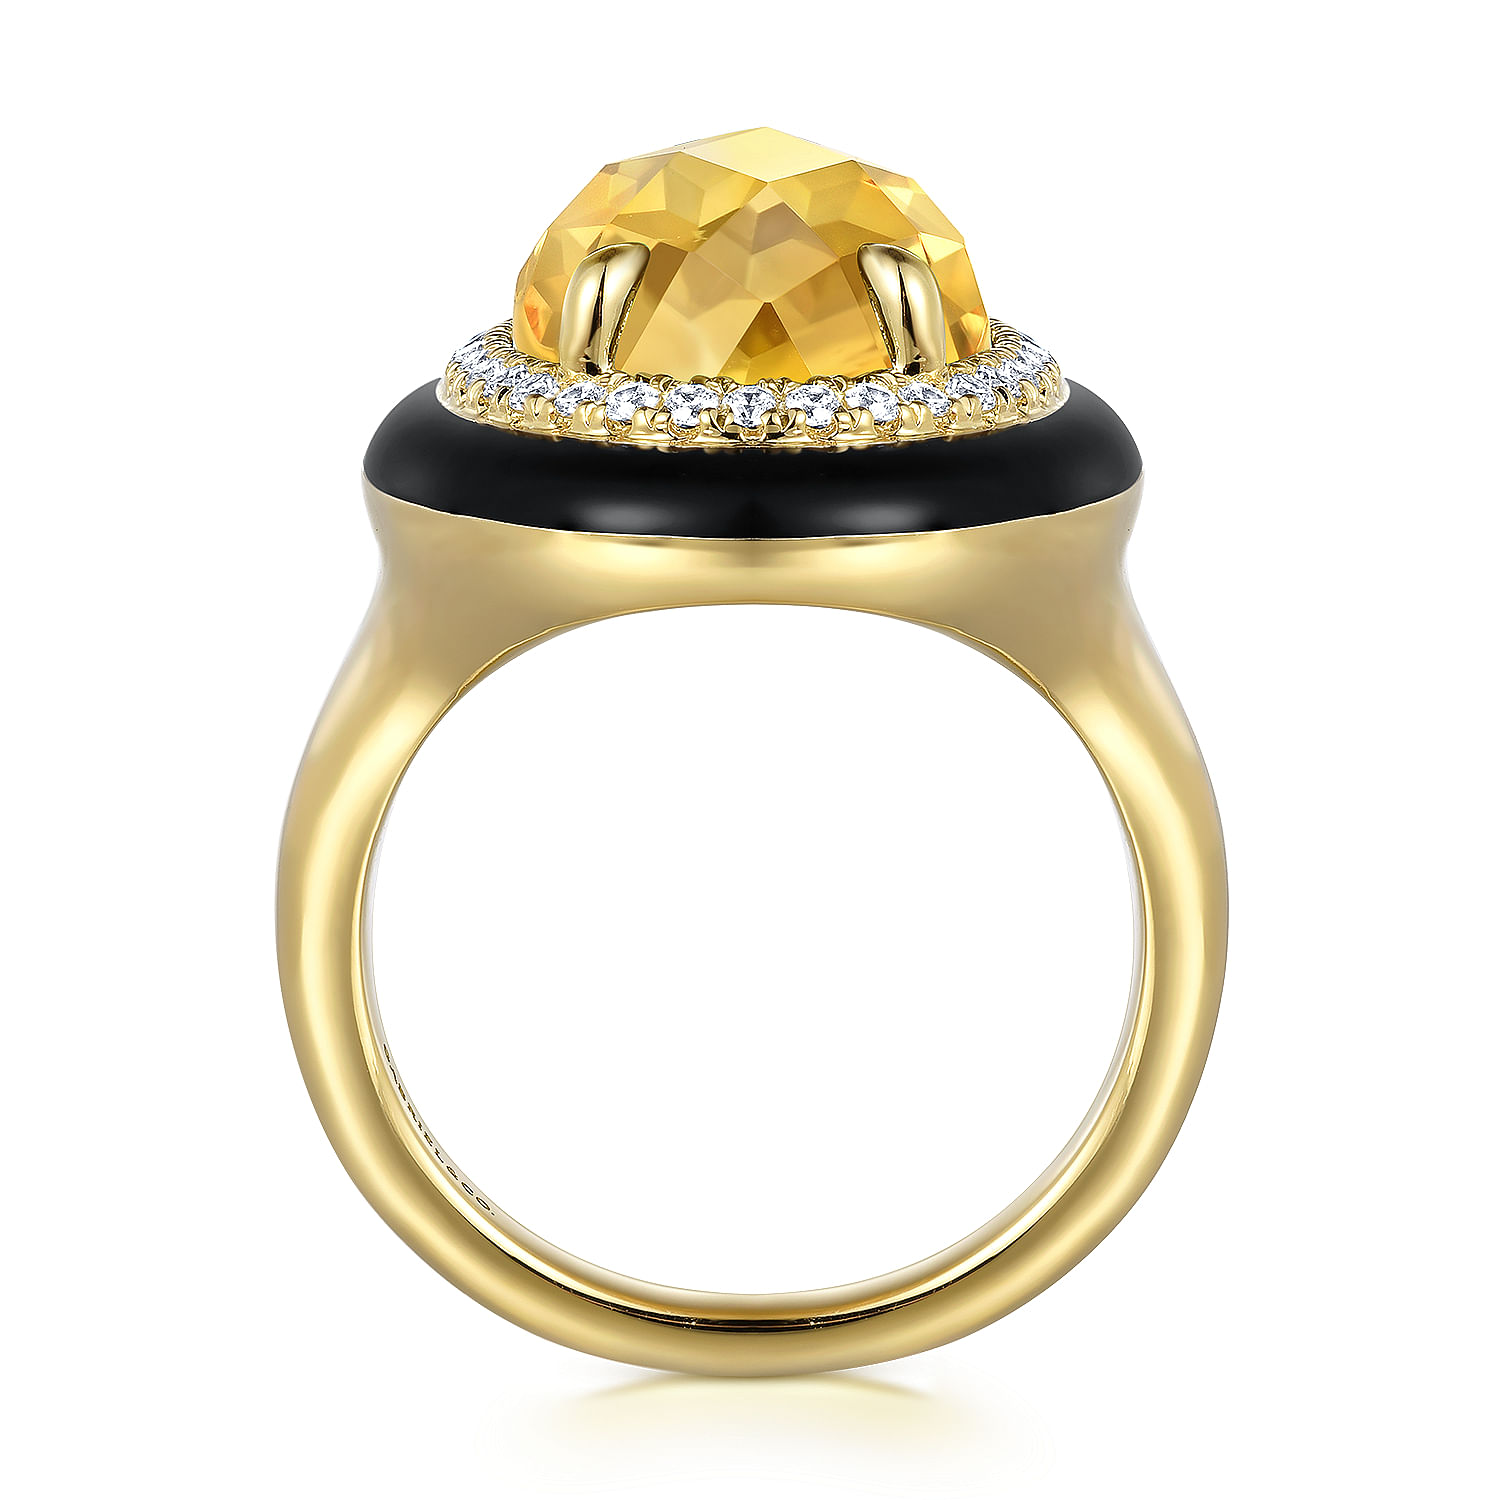 14K Yellow Gold Diamond and Oval Shape Citrine Ladies Ring With Flower Pattern J-Back and Black Enamel